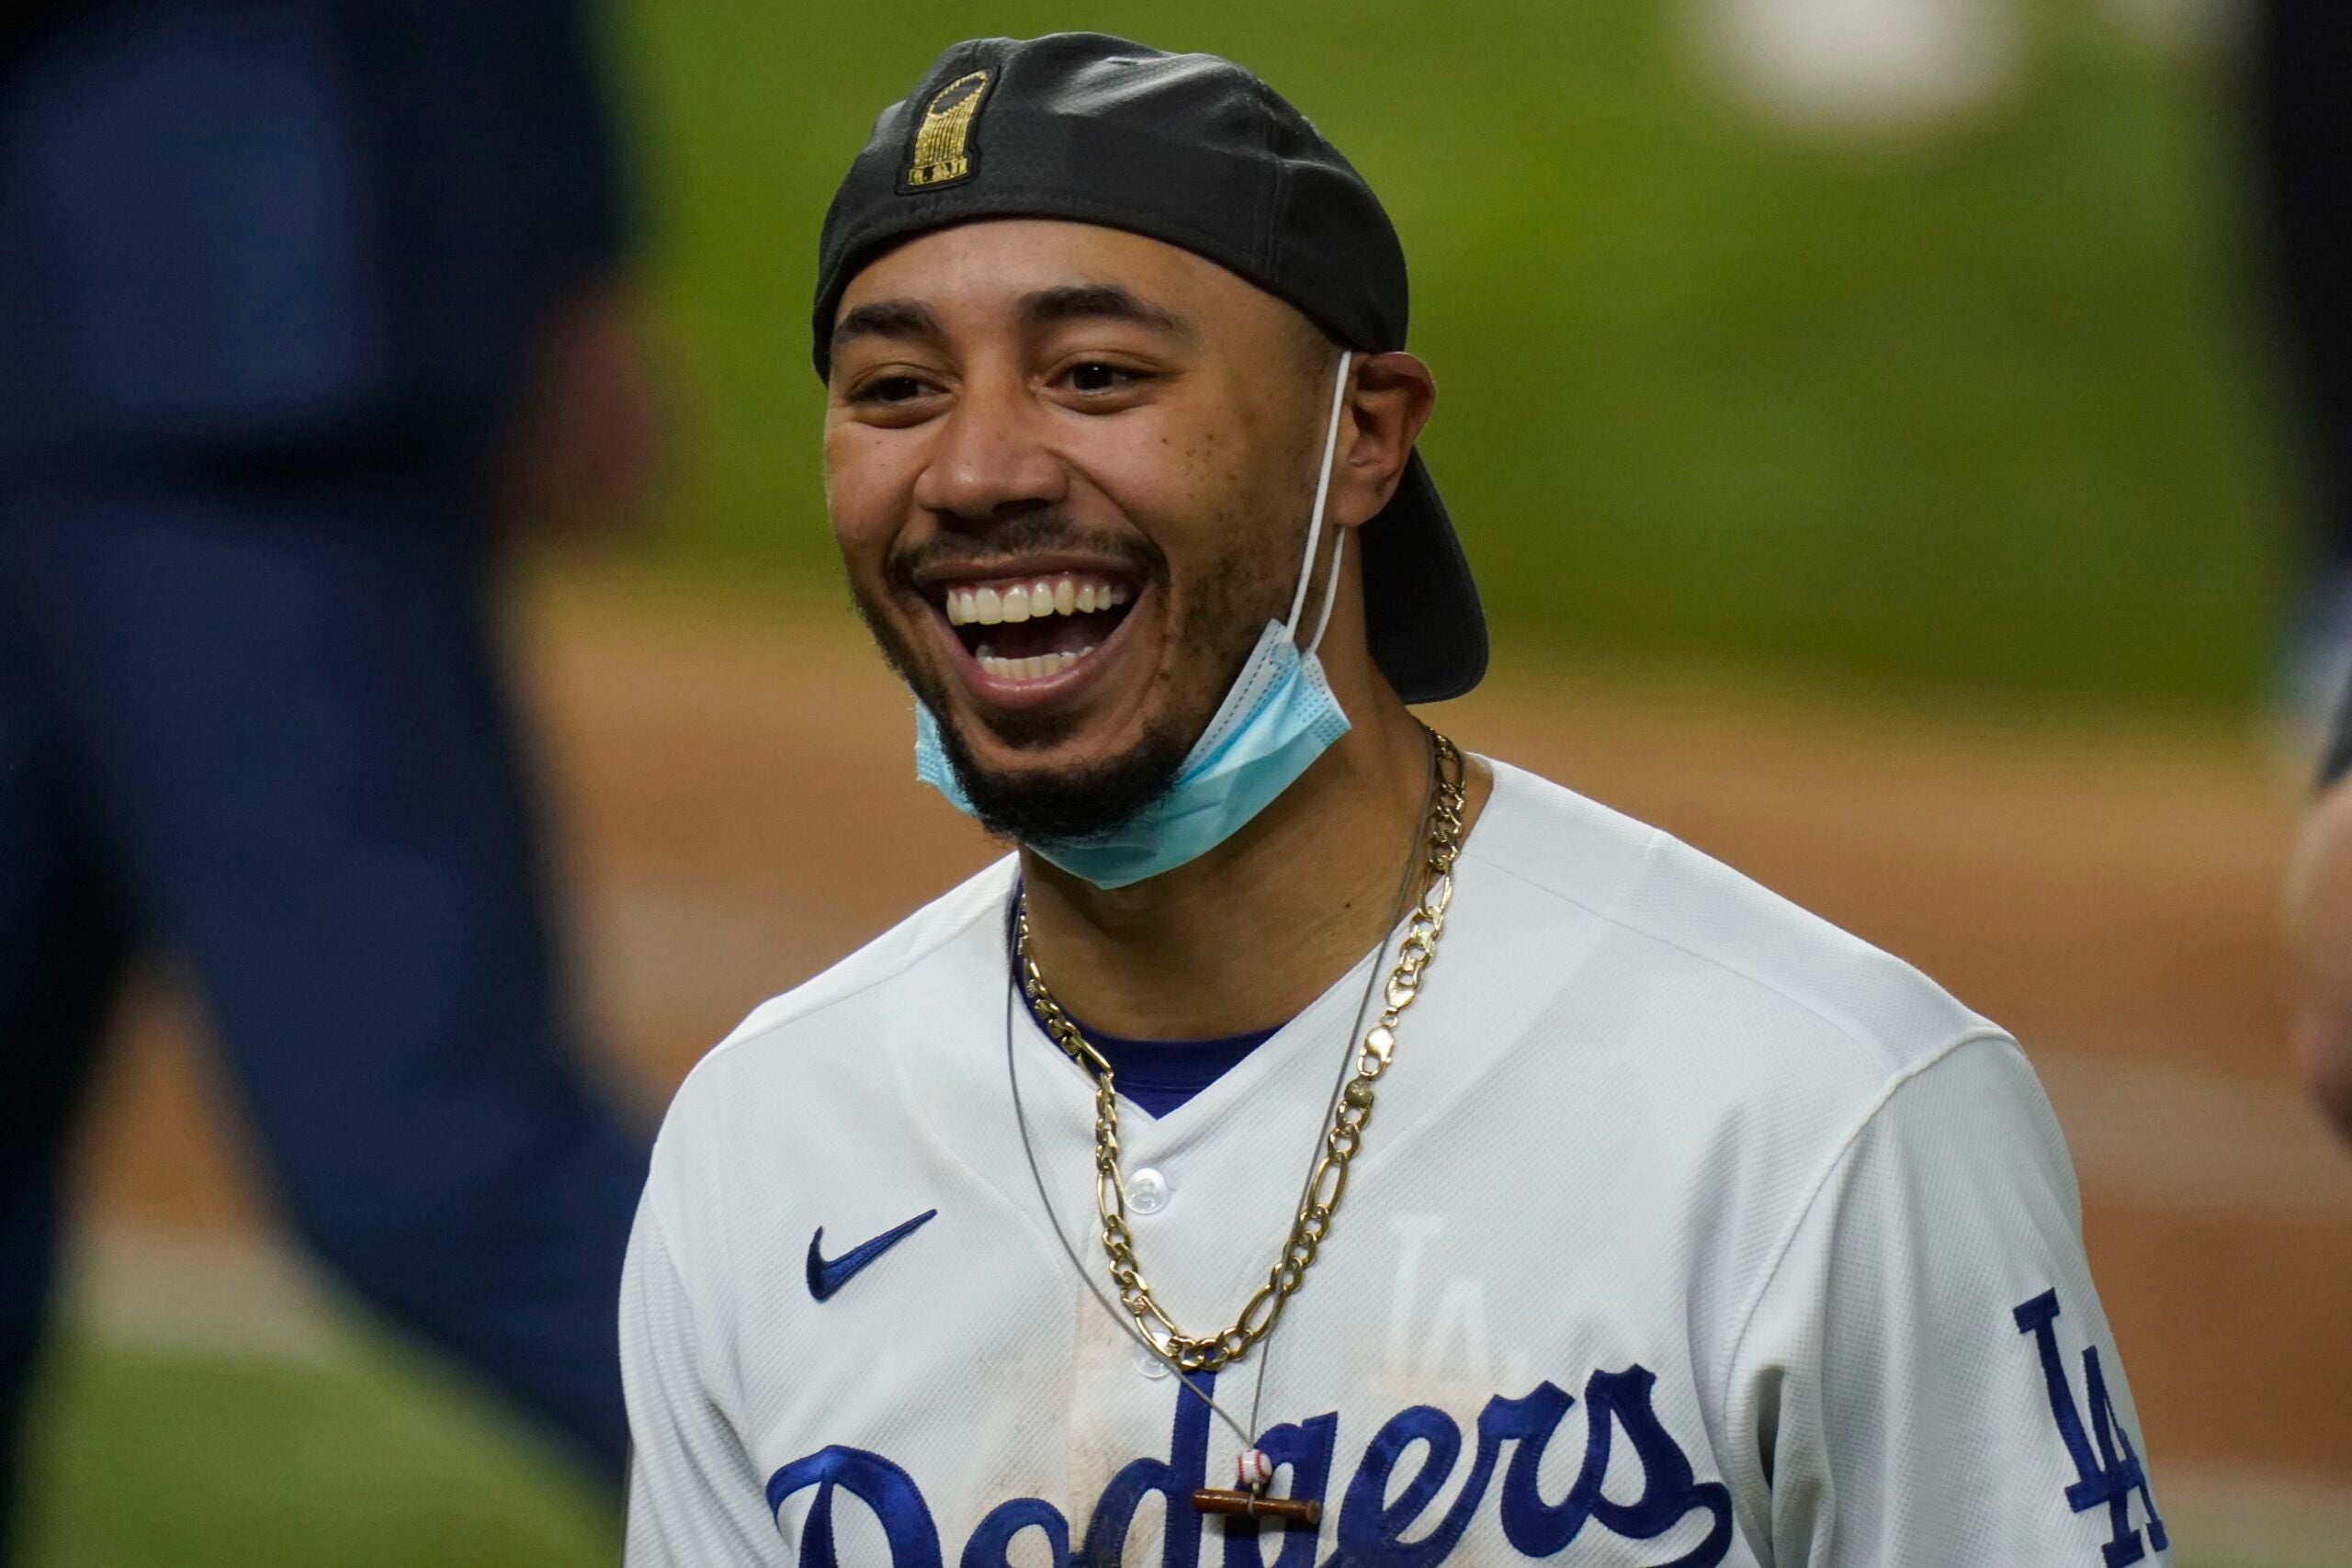 Mookie Betts searching for source of good luck necklace